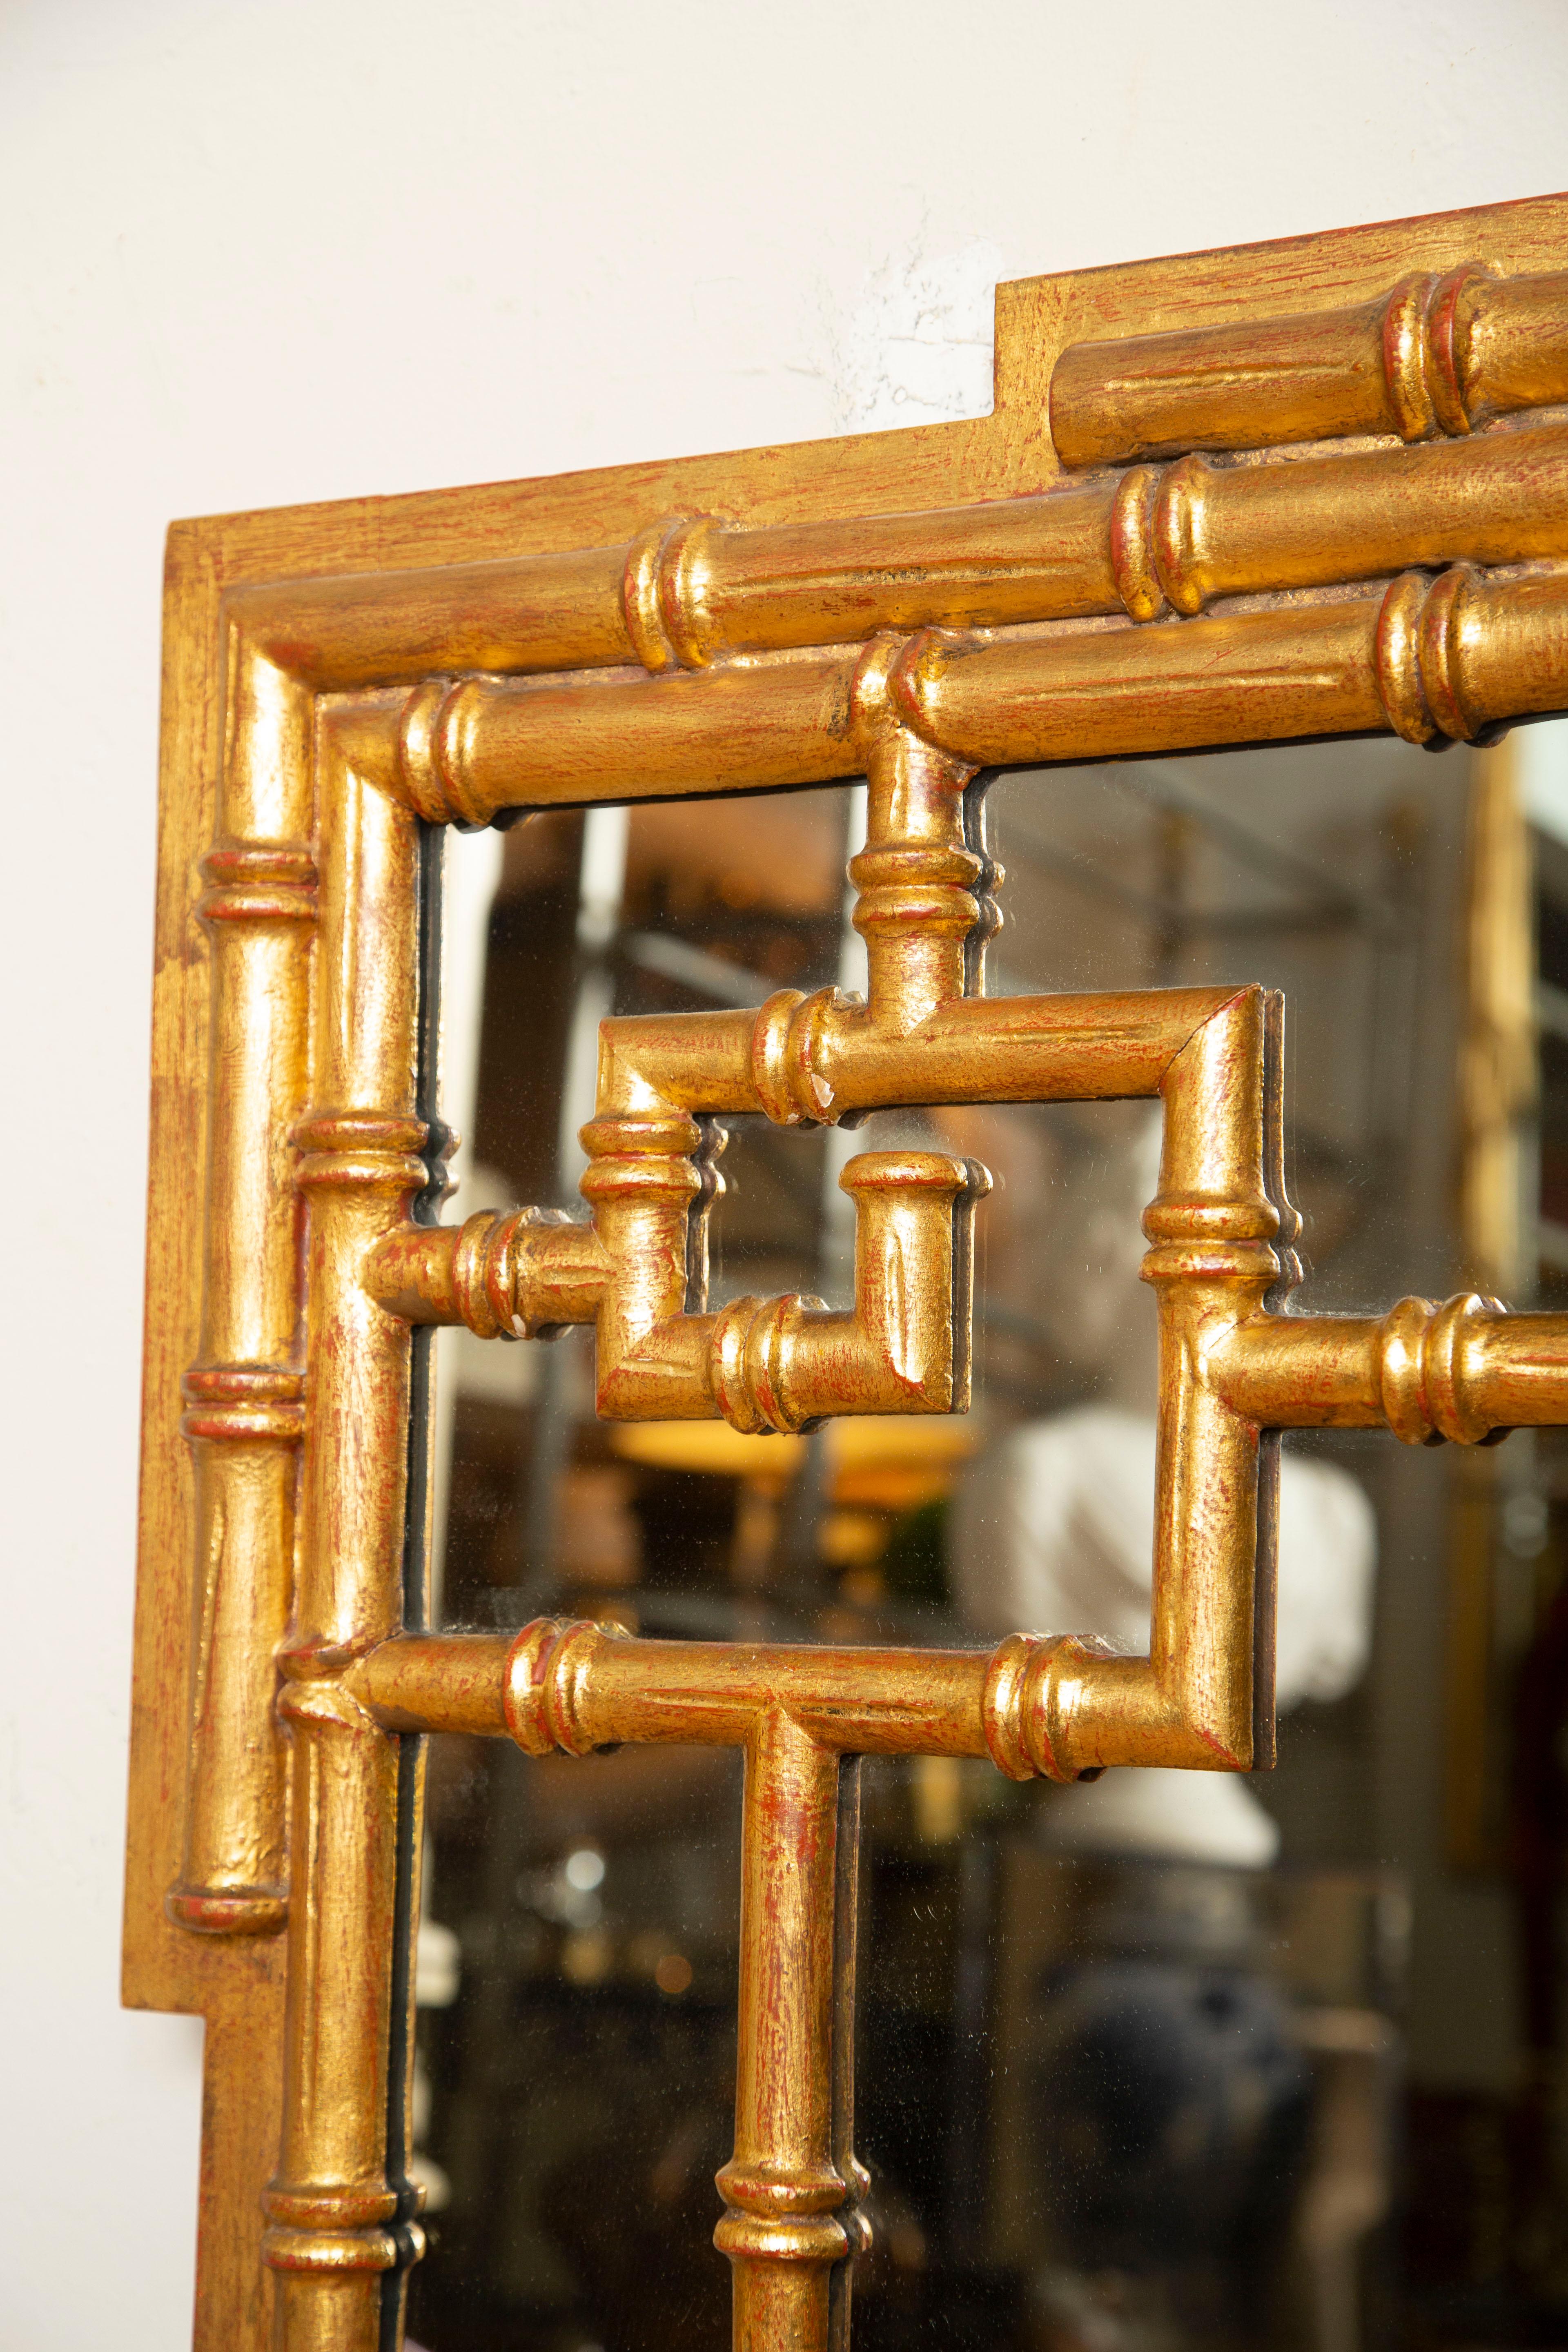 Faux bamboo chinoiserie style gilded mirror made in Italy.